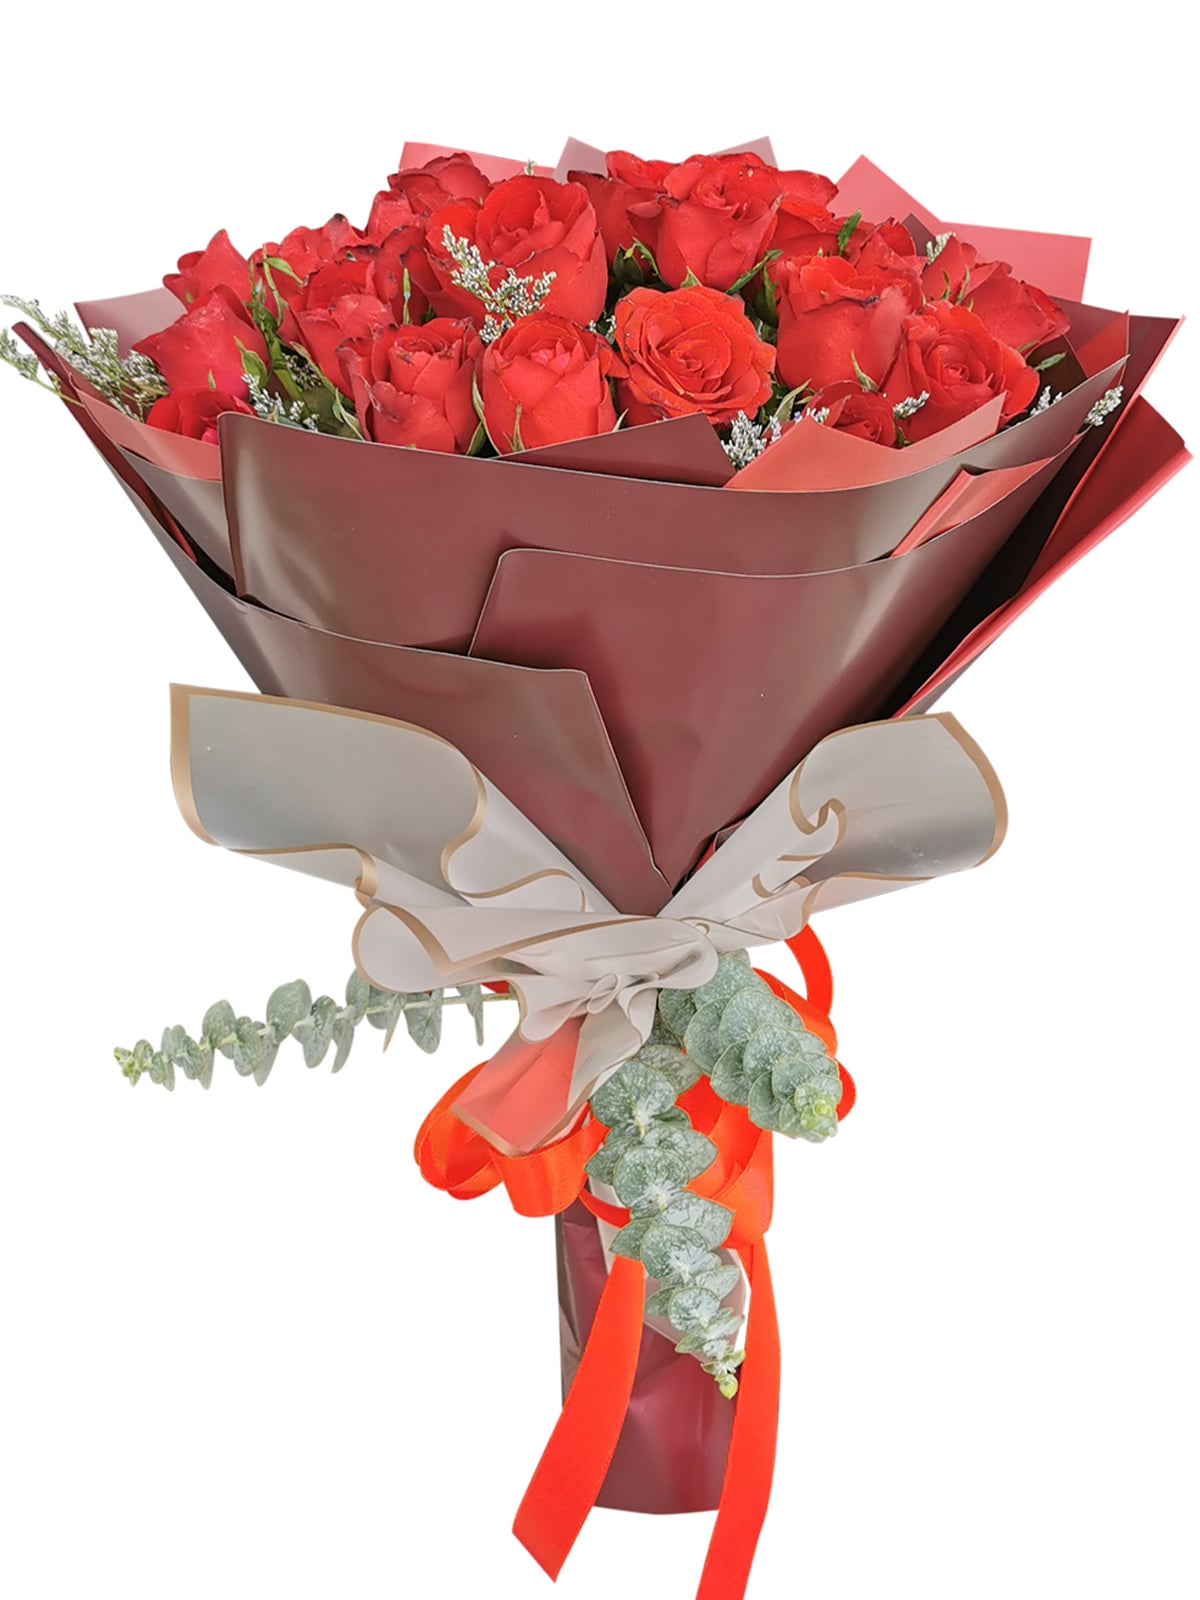 24 stem red roses, maroon wrapper